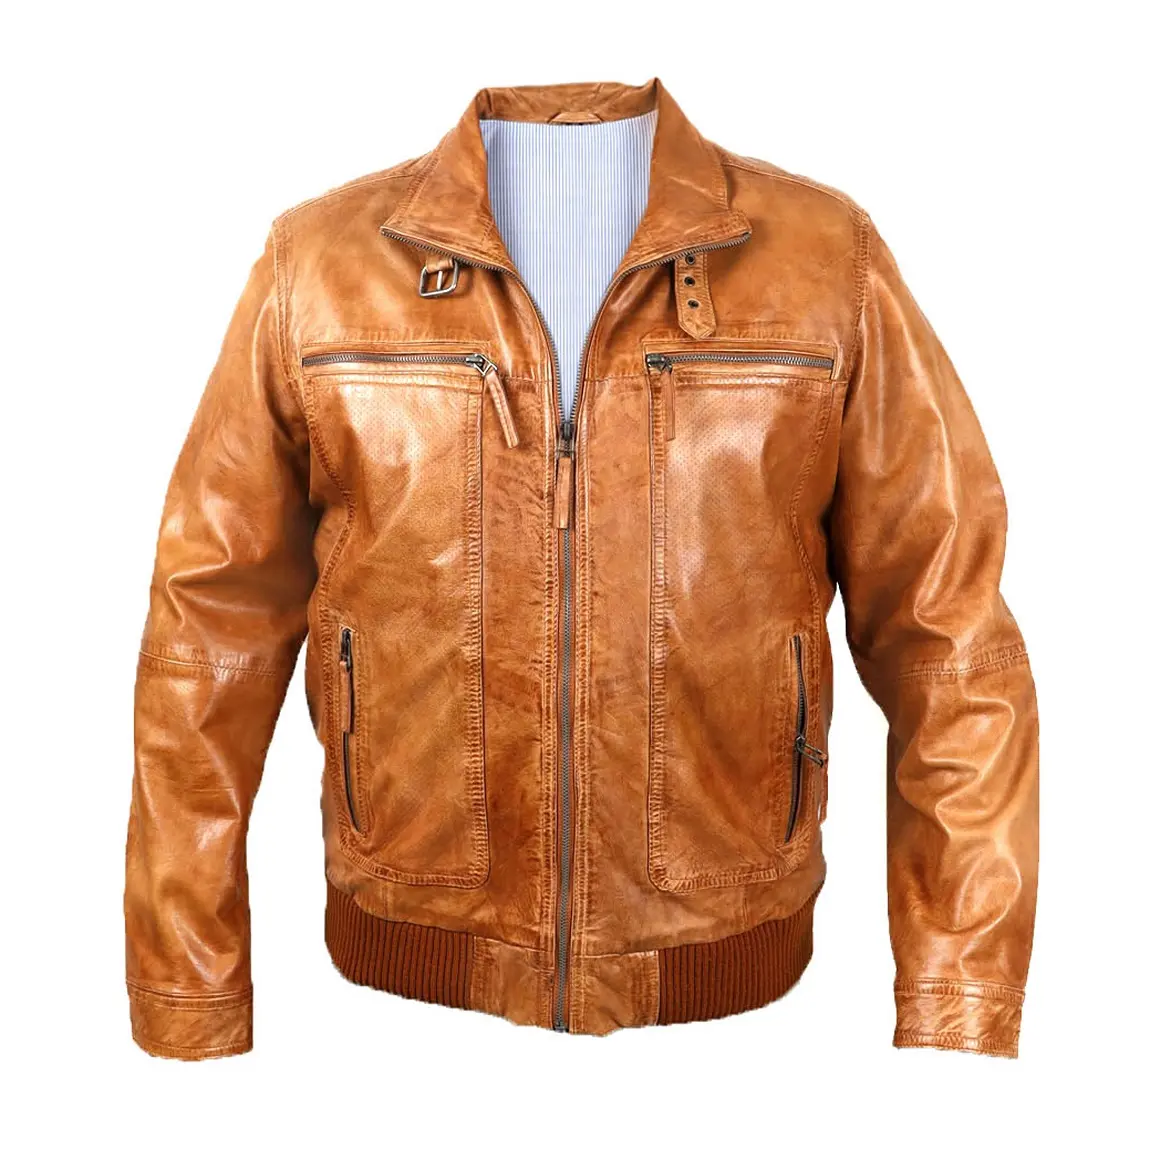 Distressed Leather Bomber Jacket Cognac Color Mens Formal Wear Perforated Leather Parts100 % Genuine Slim Fit Jackets